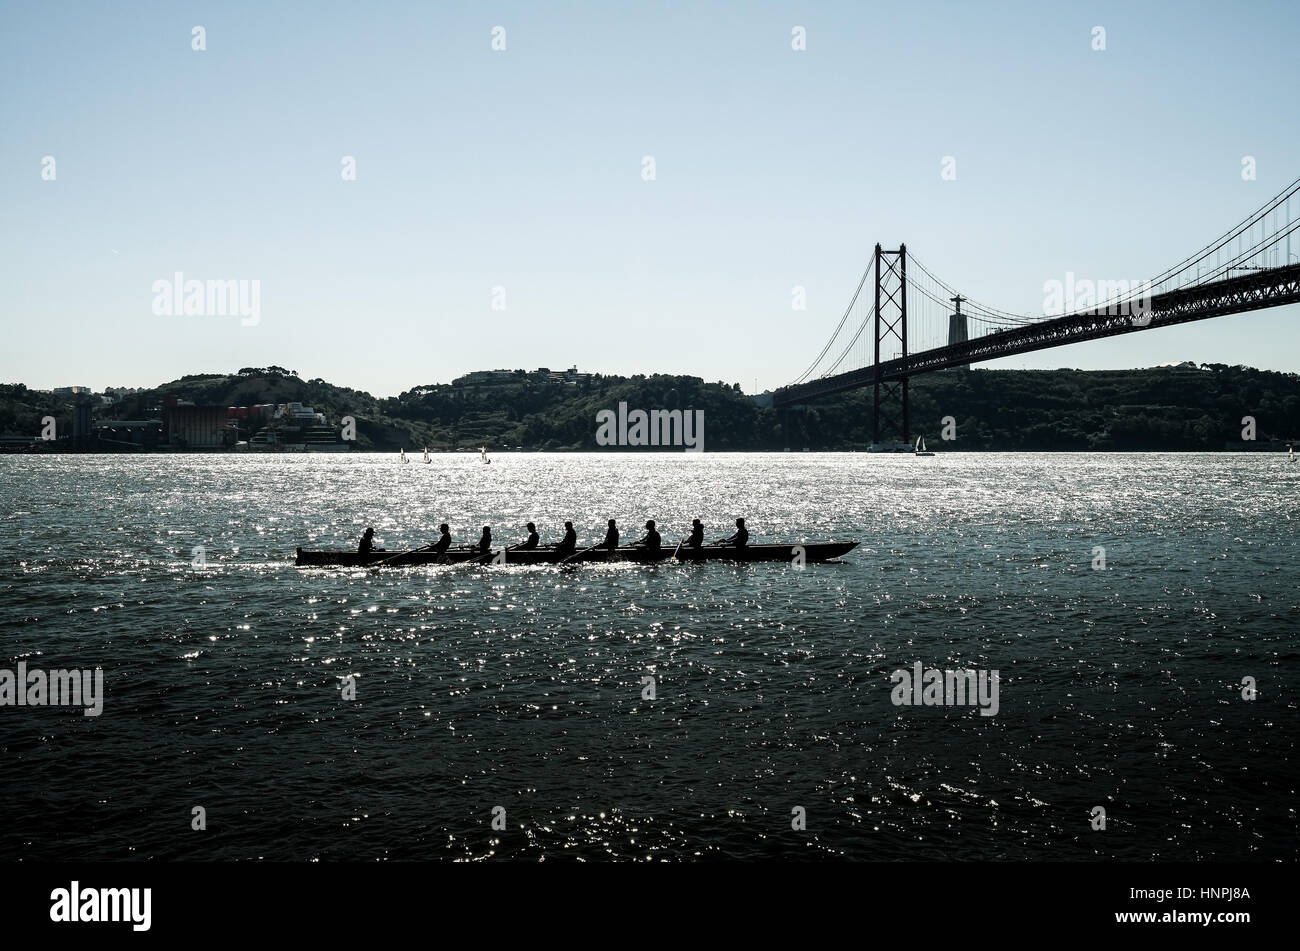 silhouette of people on rowing boat on the sea with suspension bridge in the background. Lisbon, Portugal. Stock Photo